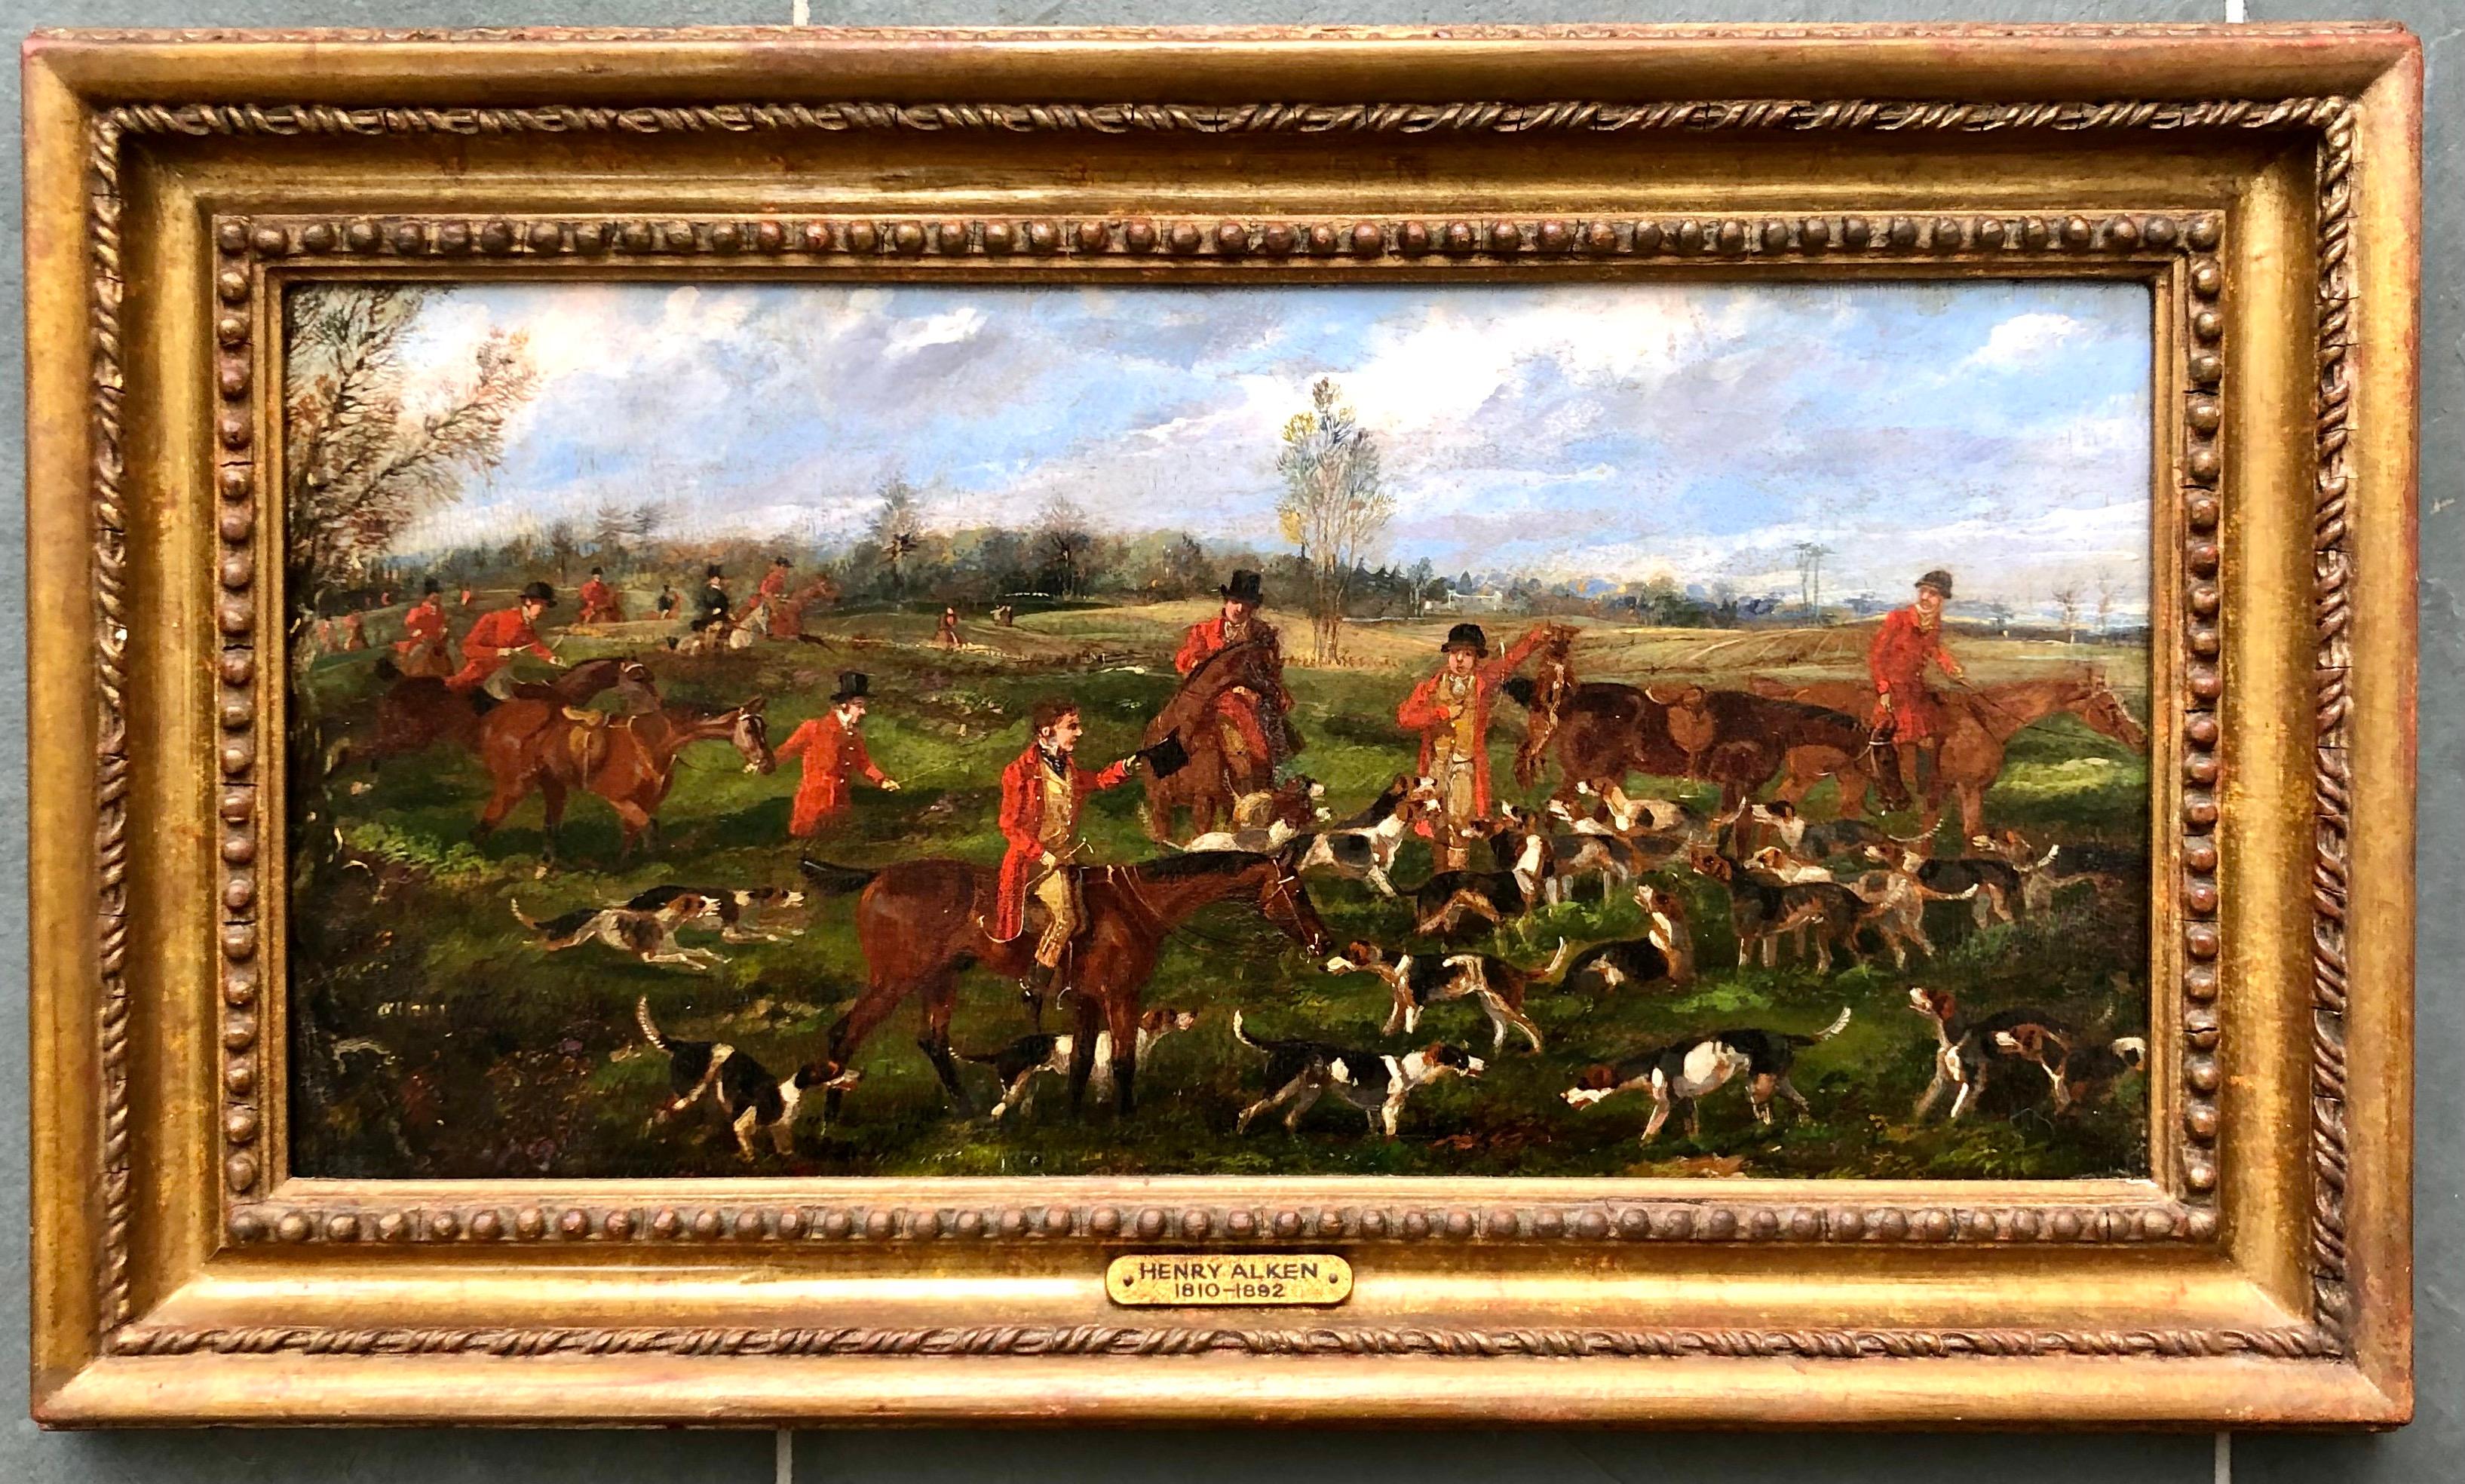 Oil on panel. With MacConnal-Mason and Son, Ltd label on reverse. 
Featuring the 'kill' of an English fox hunt scene.
Painting measures 7.25